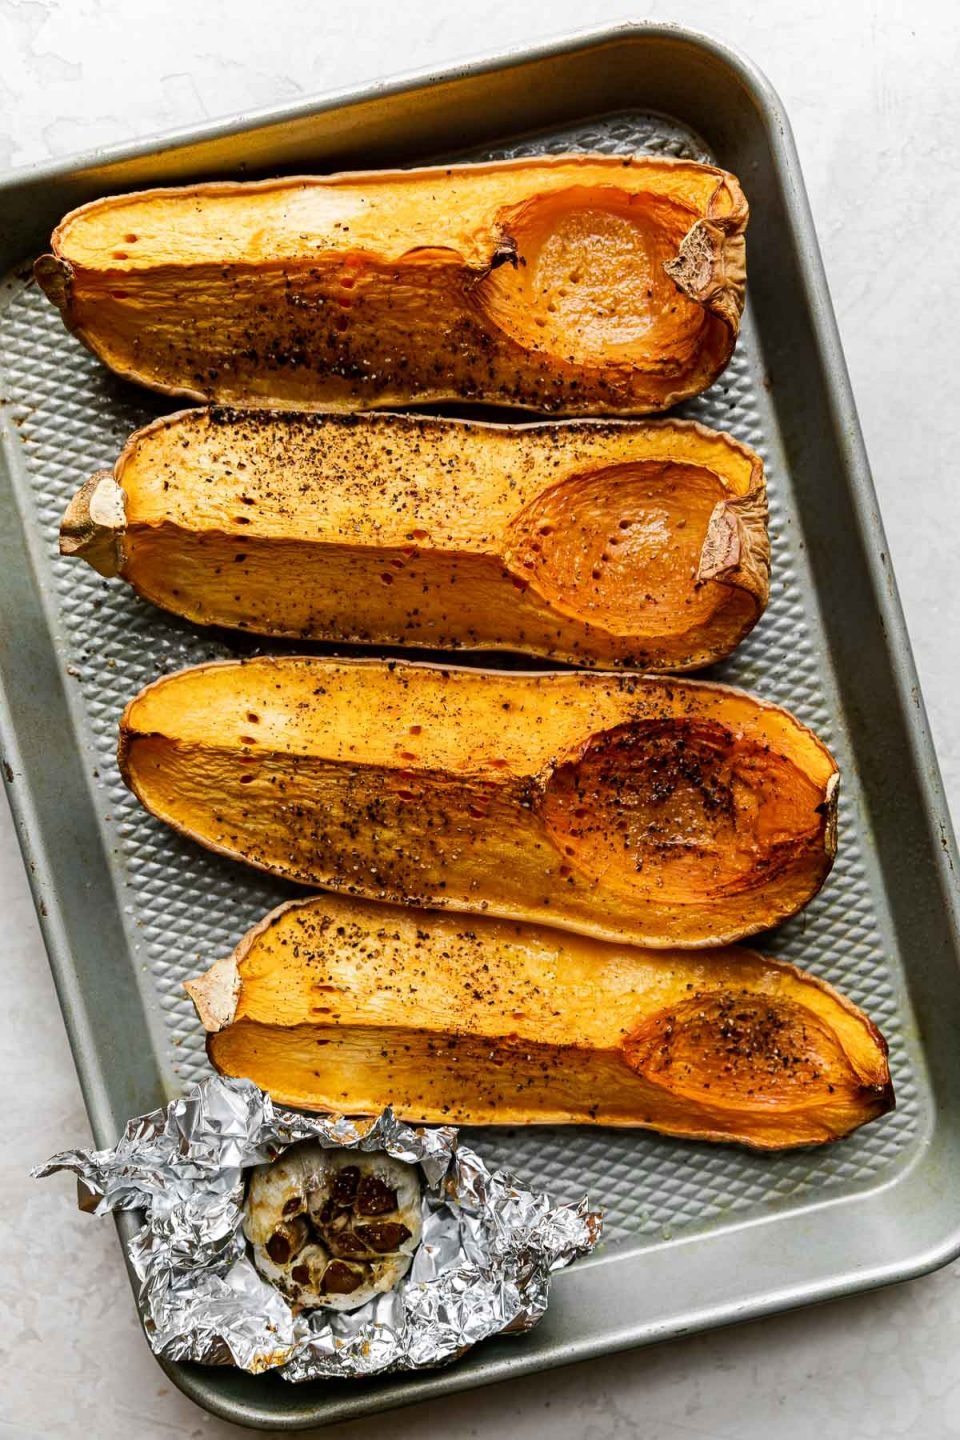 Four quartered & roasted butternut squash pieces arranged on a sheet pan alongside a bulb of roasted garlic wrapped in tin foil. The sheet pan rests on a creamy cement surface.